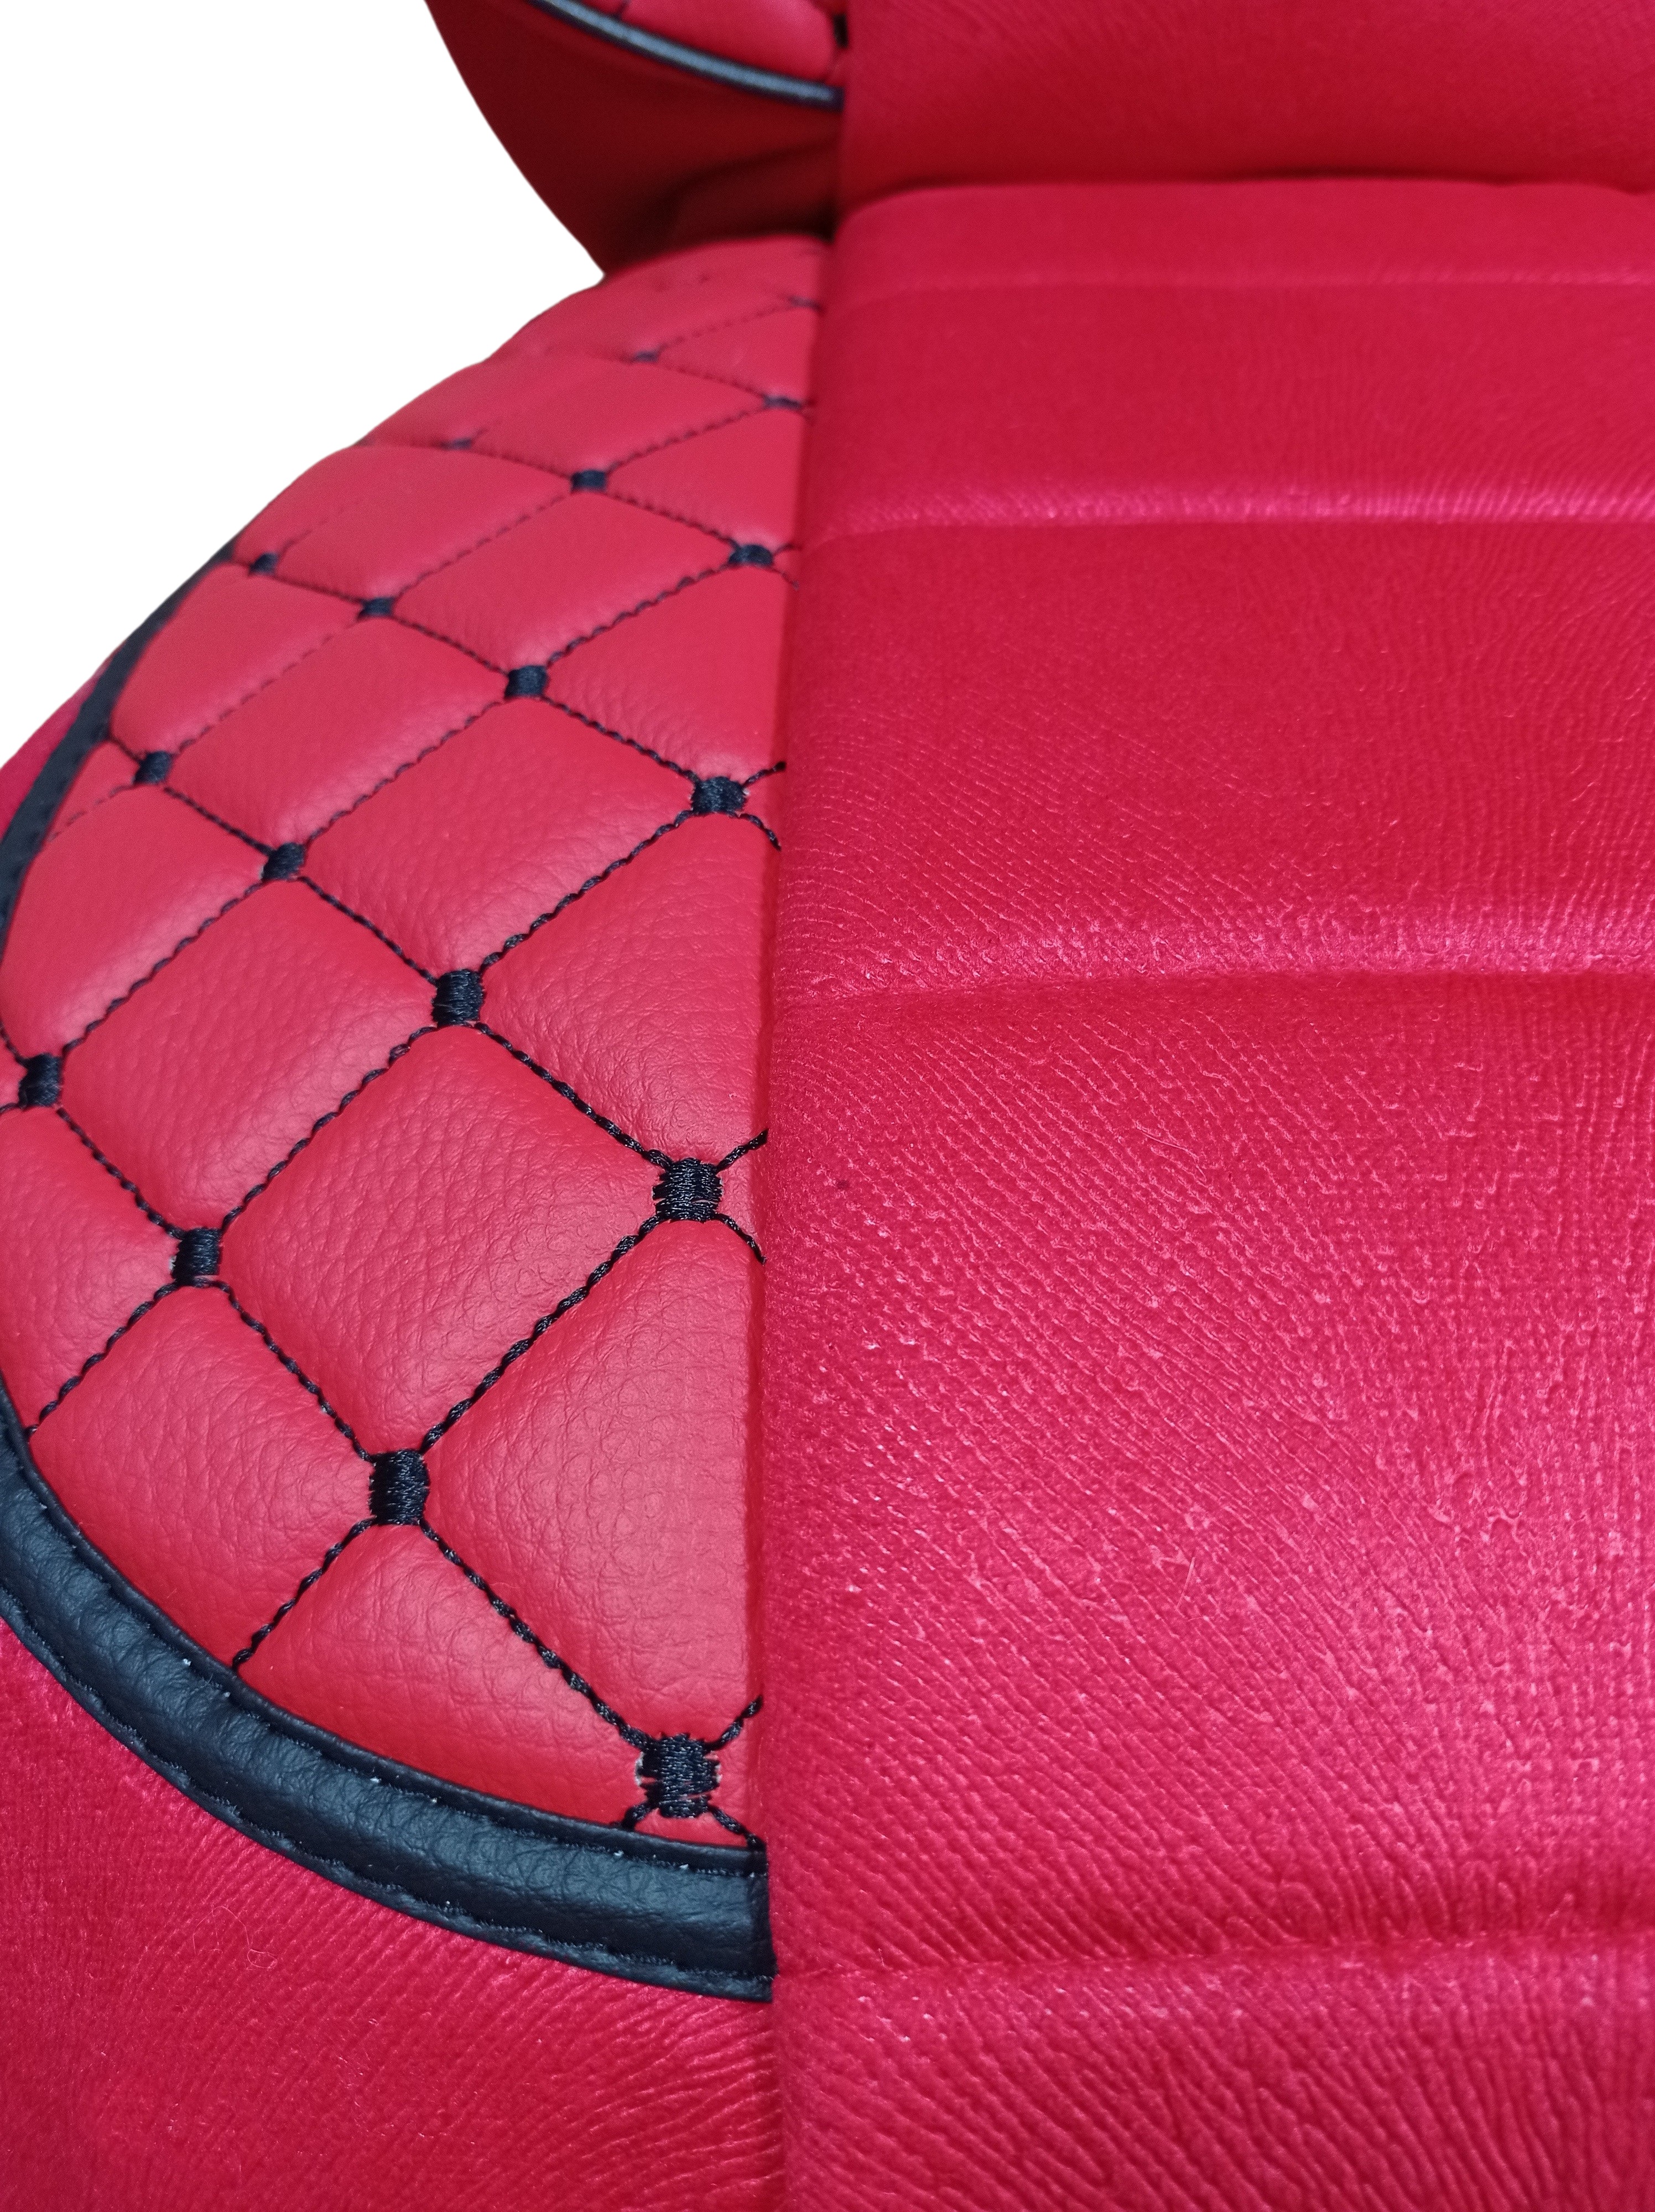 Seat covers for Volvo FH 2014-2020 EURO 6 Truck Red Leather Textil RHD LHD